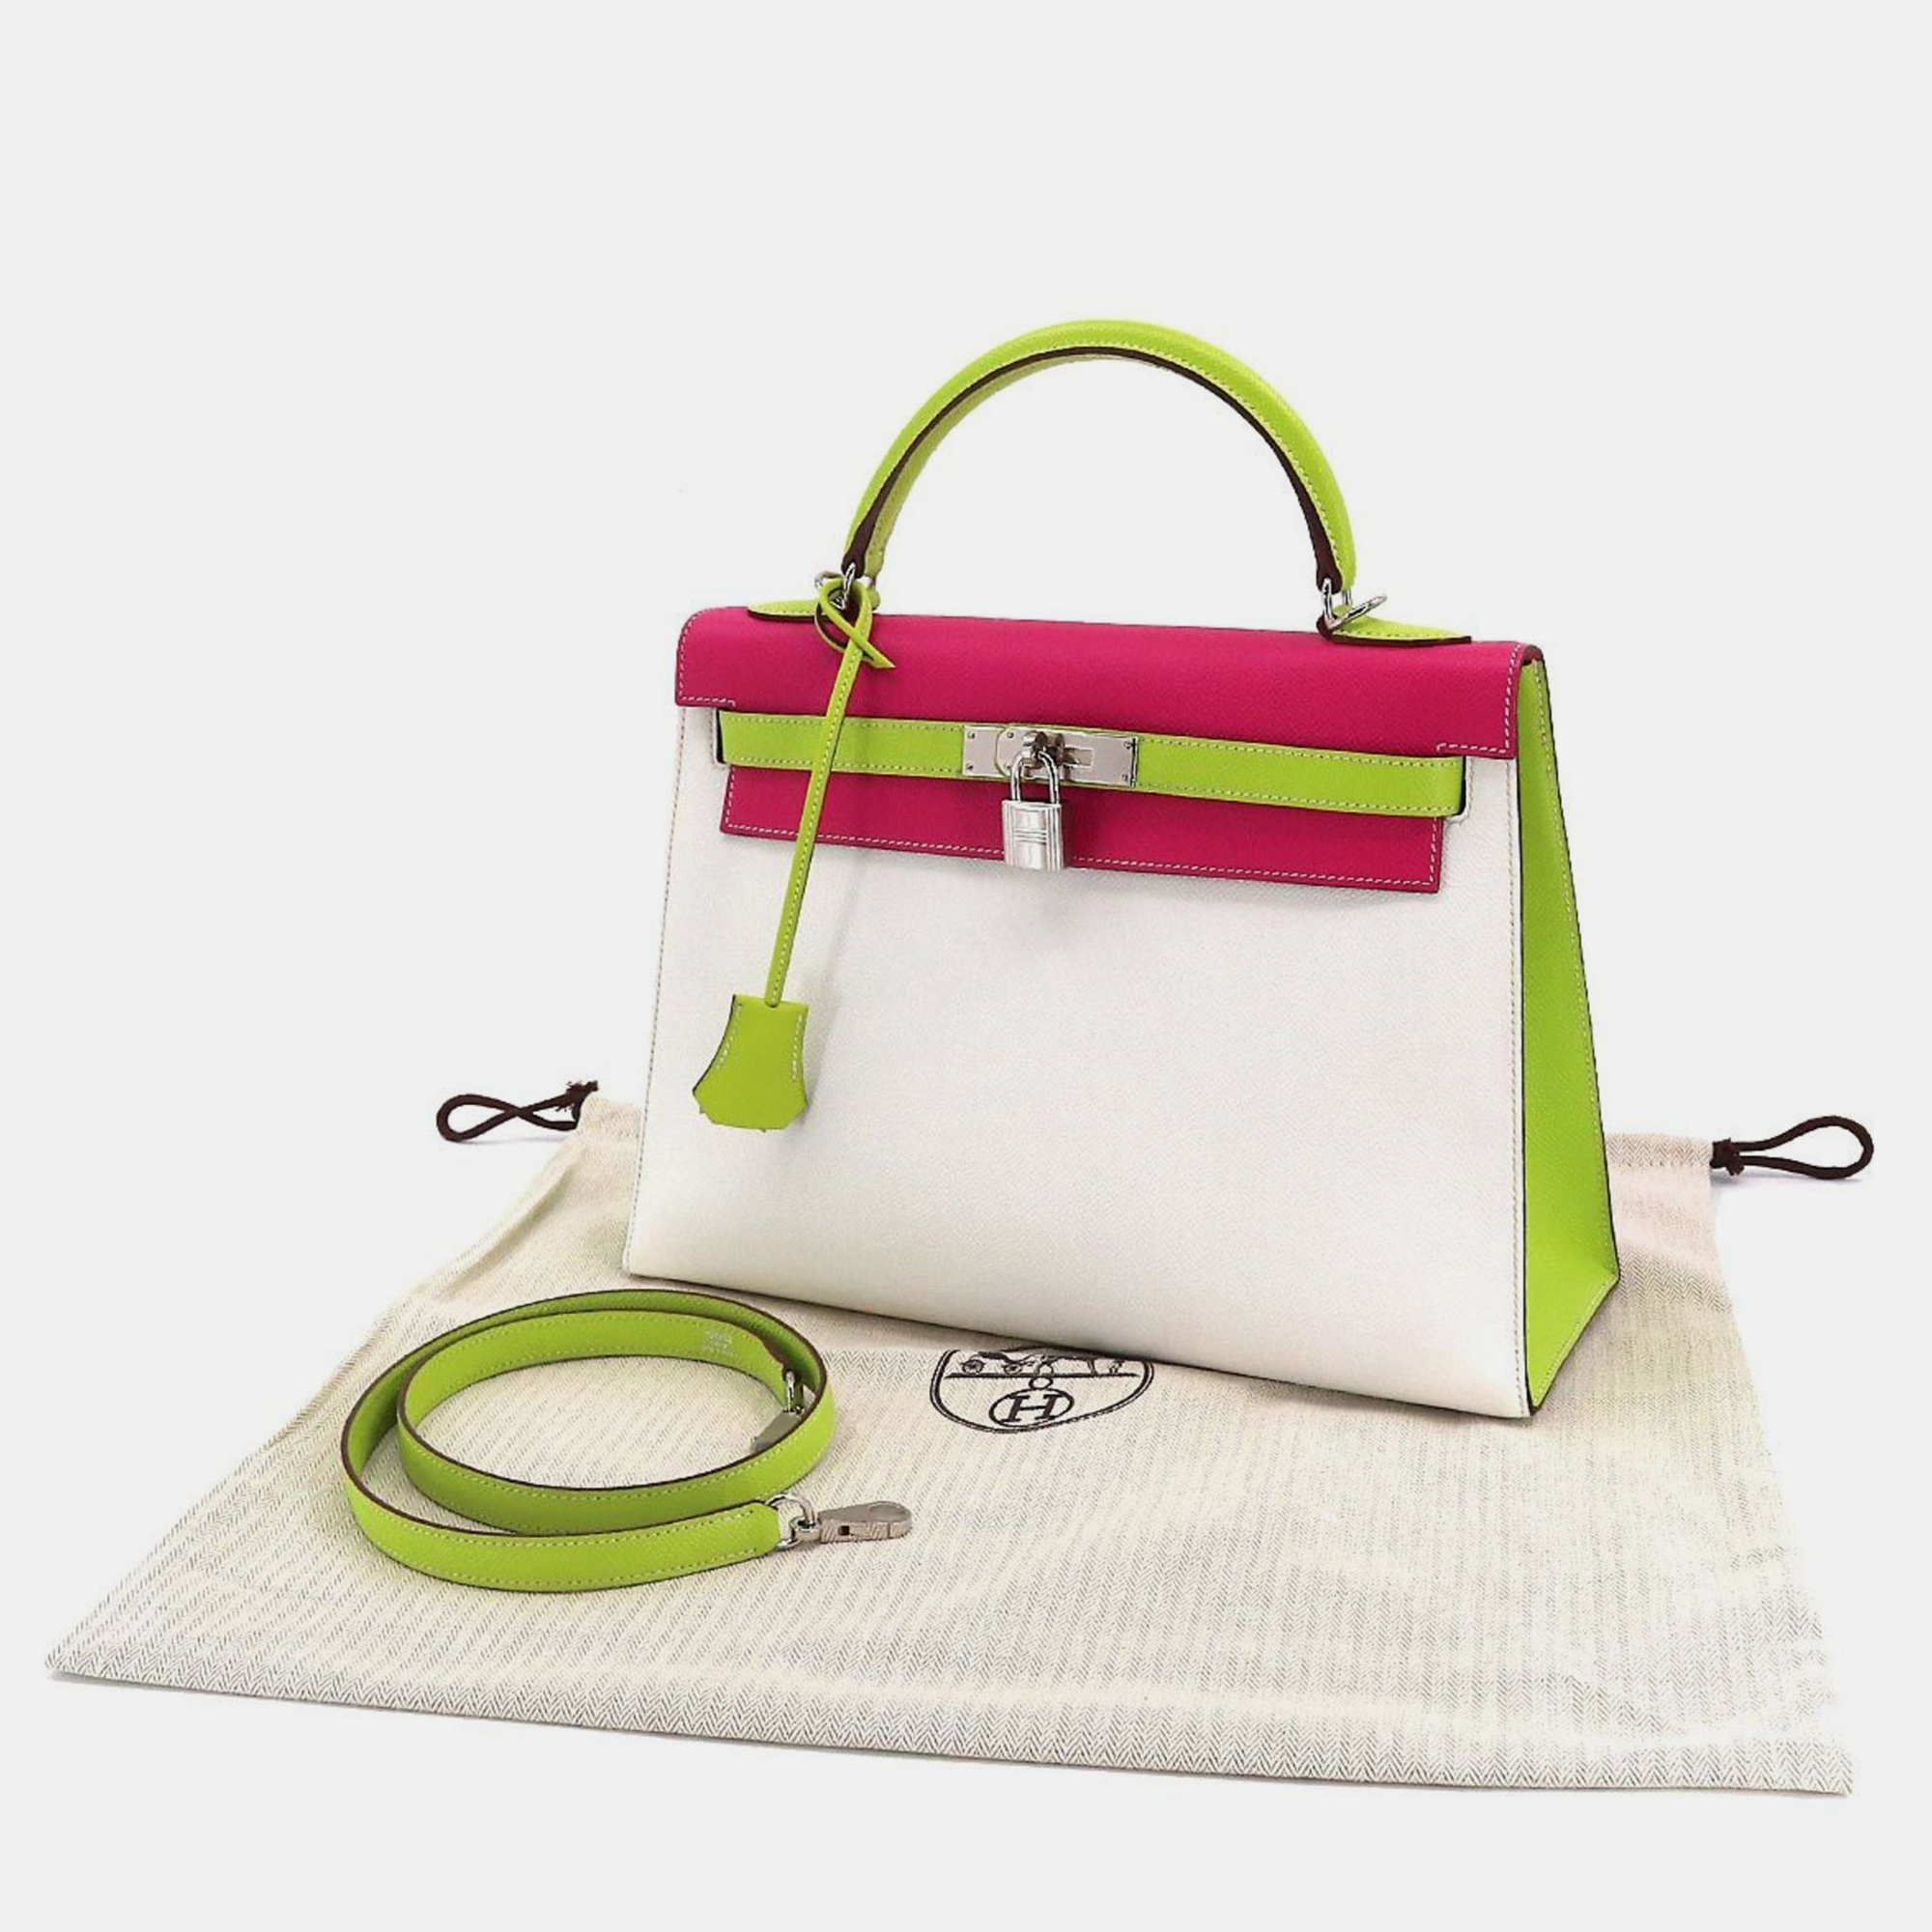 HERMES Kelly 32 Personal SPO 2way Hand Shoulder Bag Epson White Rose Tyrian Kiwi P Stamp Outside Sewing